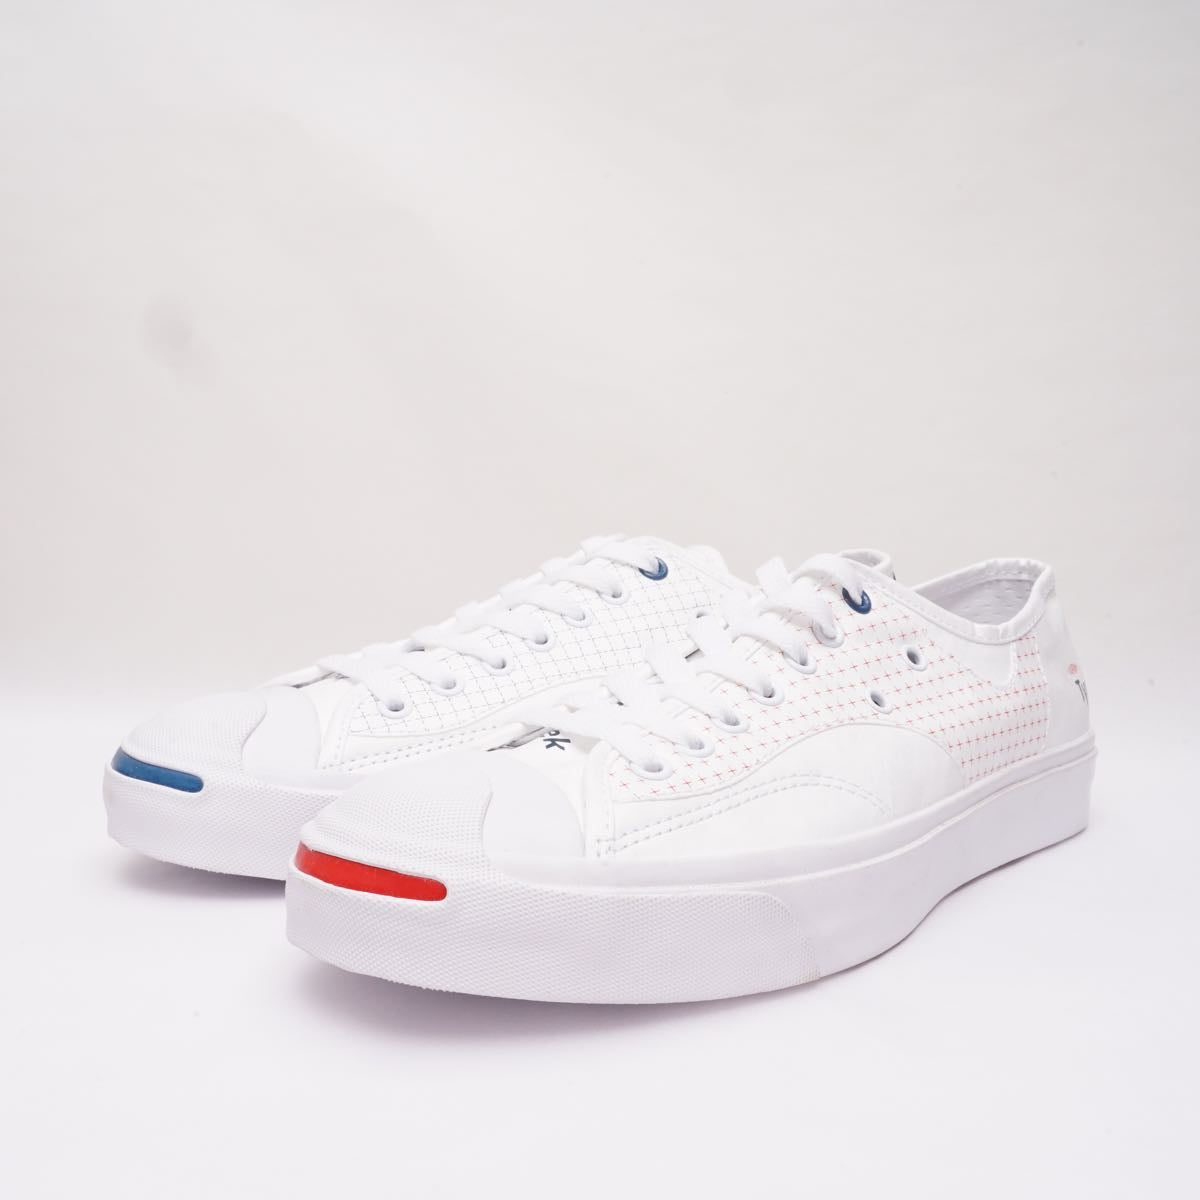 【MEN】CONVERSE JACK PURCELL RALLY OX